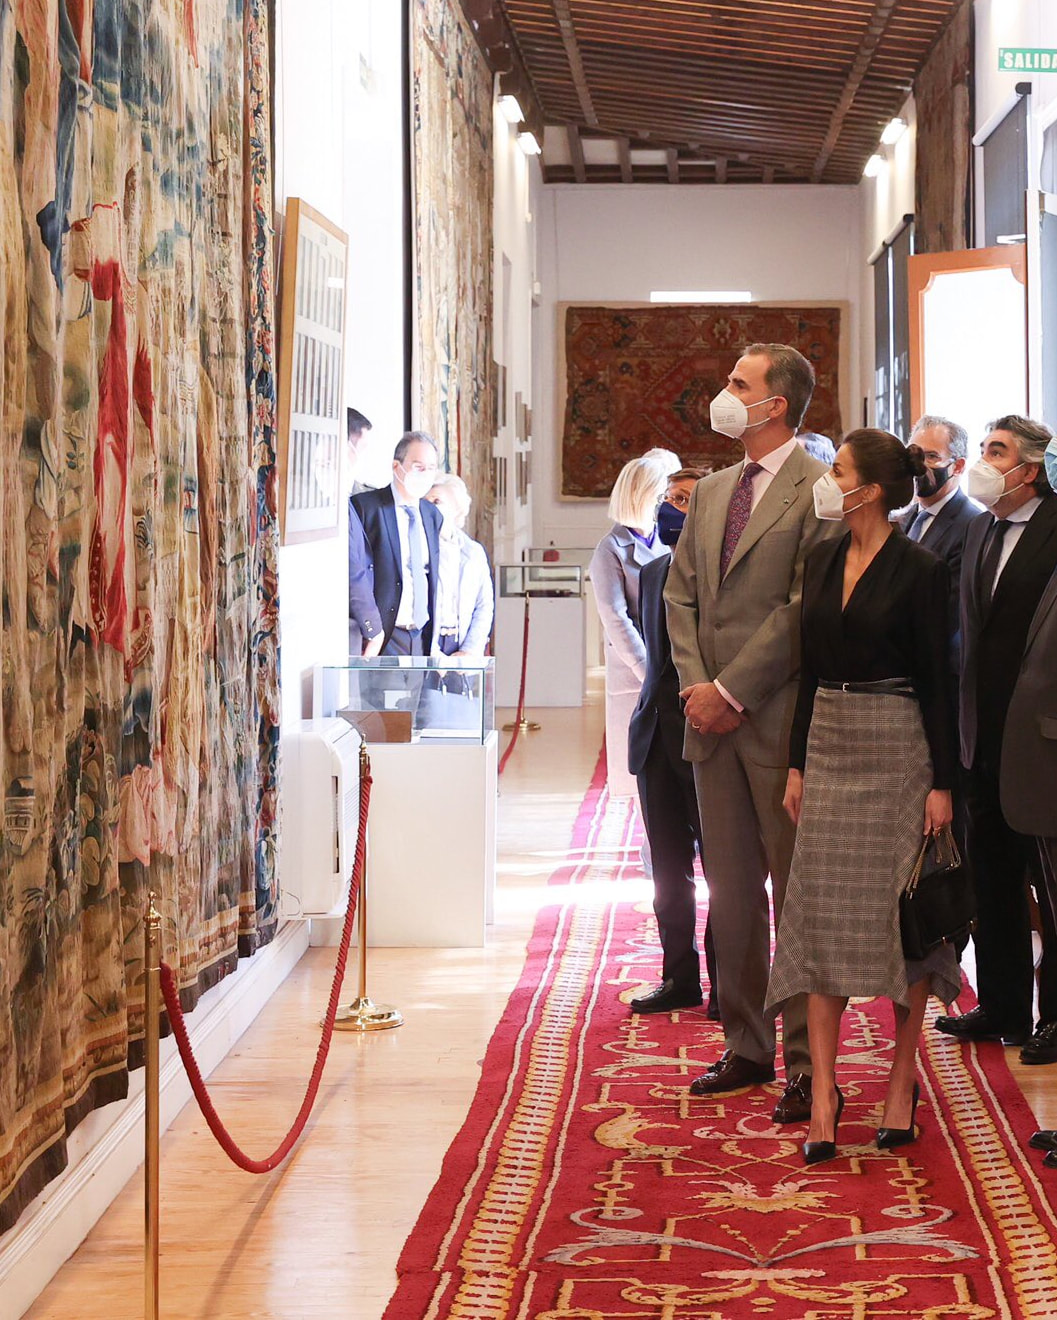 King Felipe VI and Queen Letizia of Spain visited the Real Fábrica de Tapices (Royal Tapestry Factory), on the occasion of its 300th anniversary in Madrid on 16 March 2021